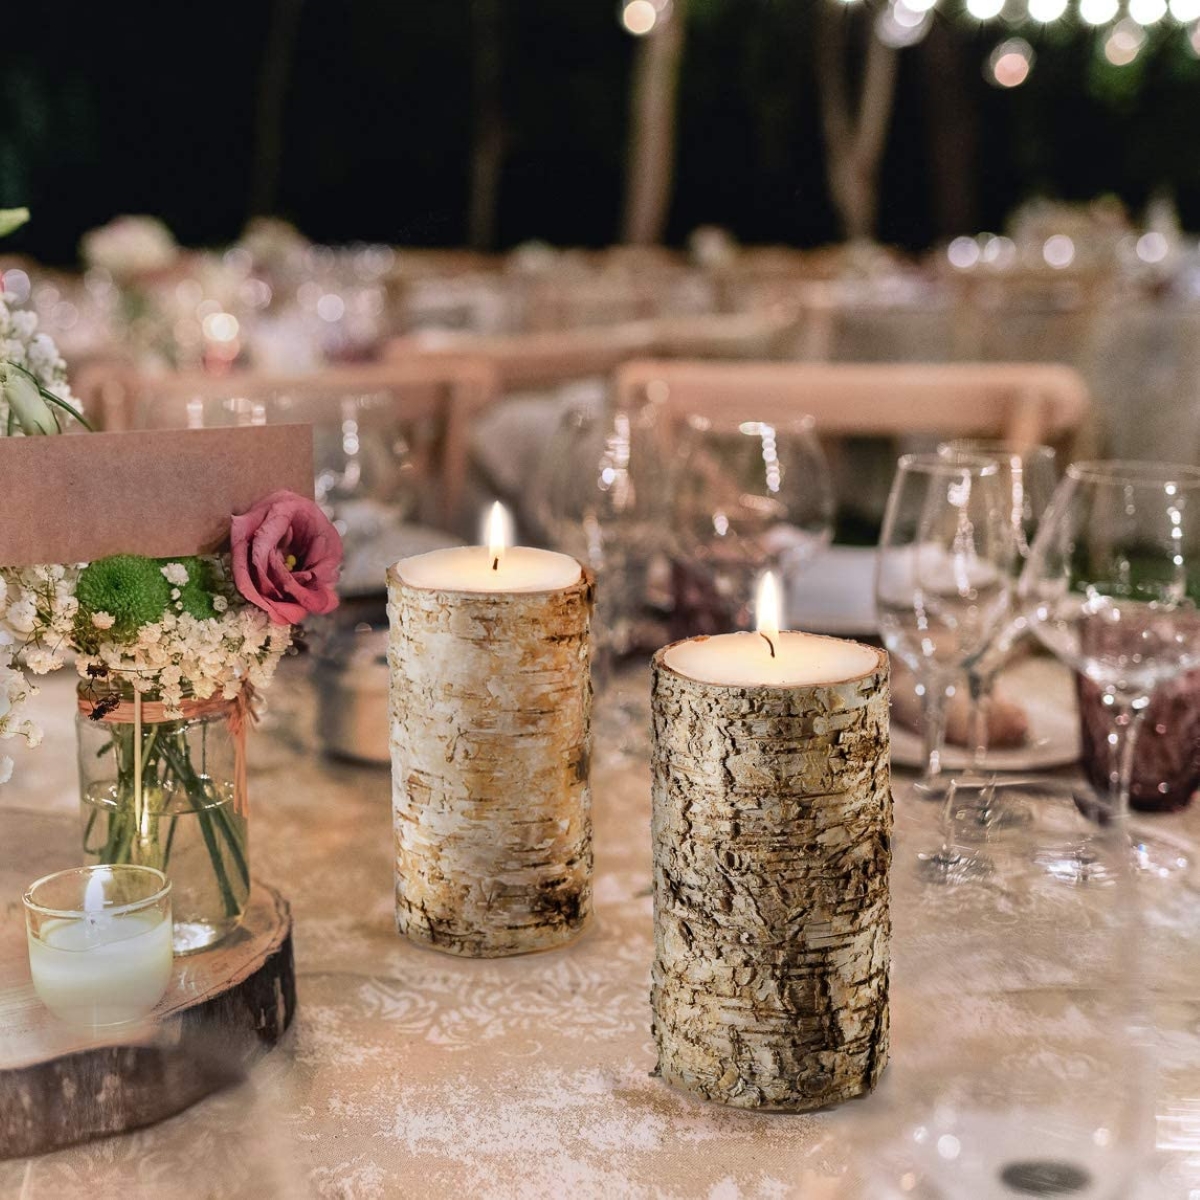 decor with candles - two birch wrapped candles